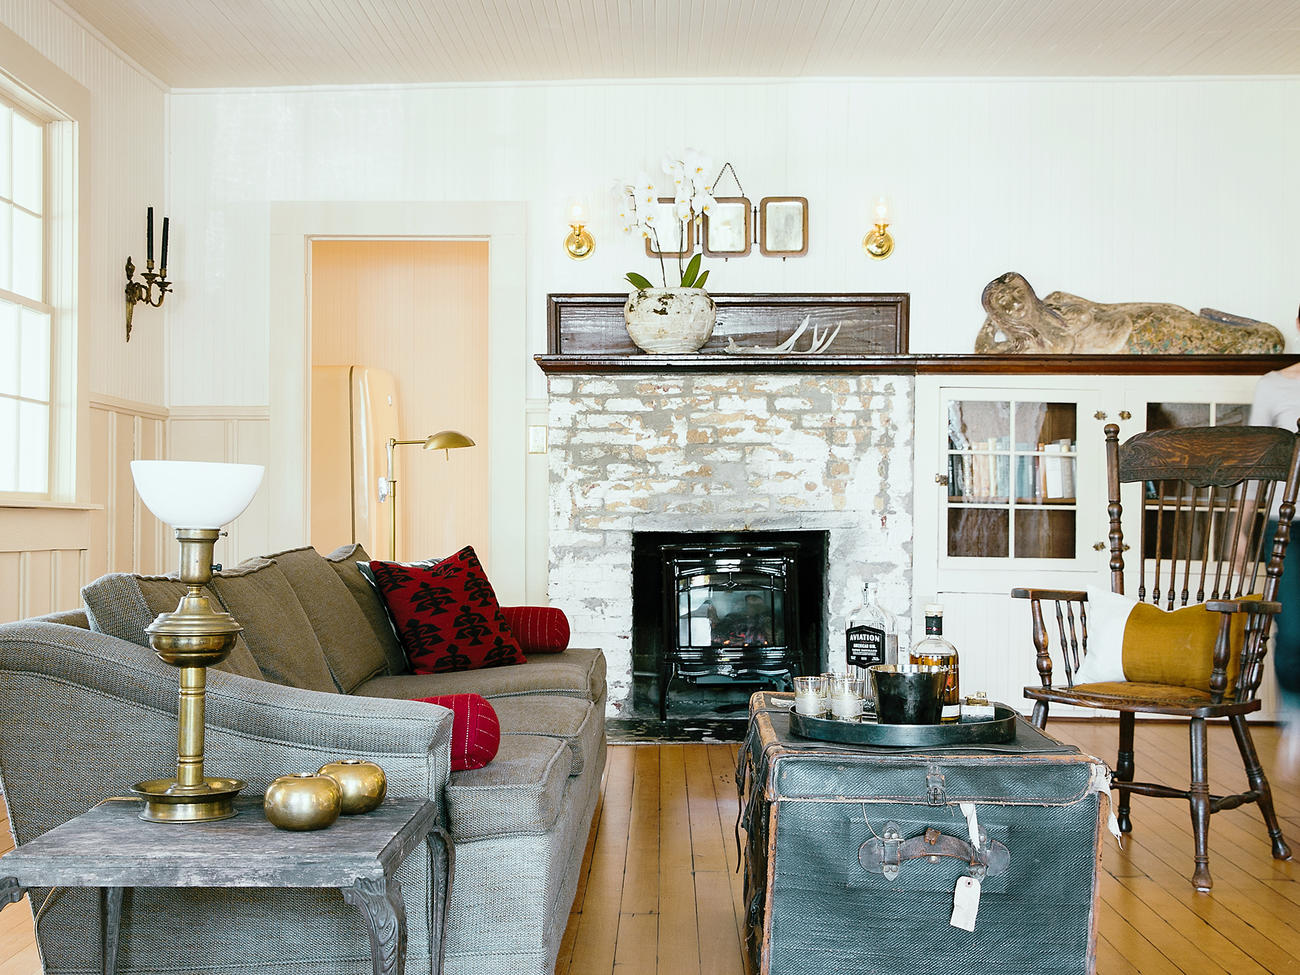 14 Ways to Style a Coffee Table